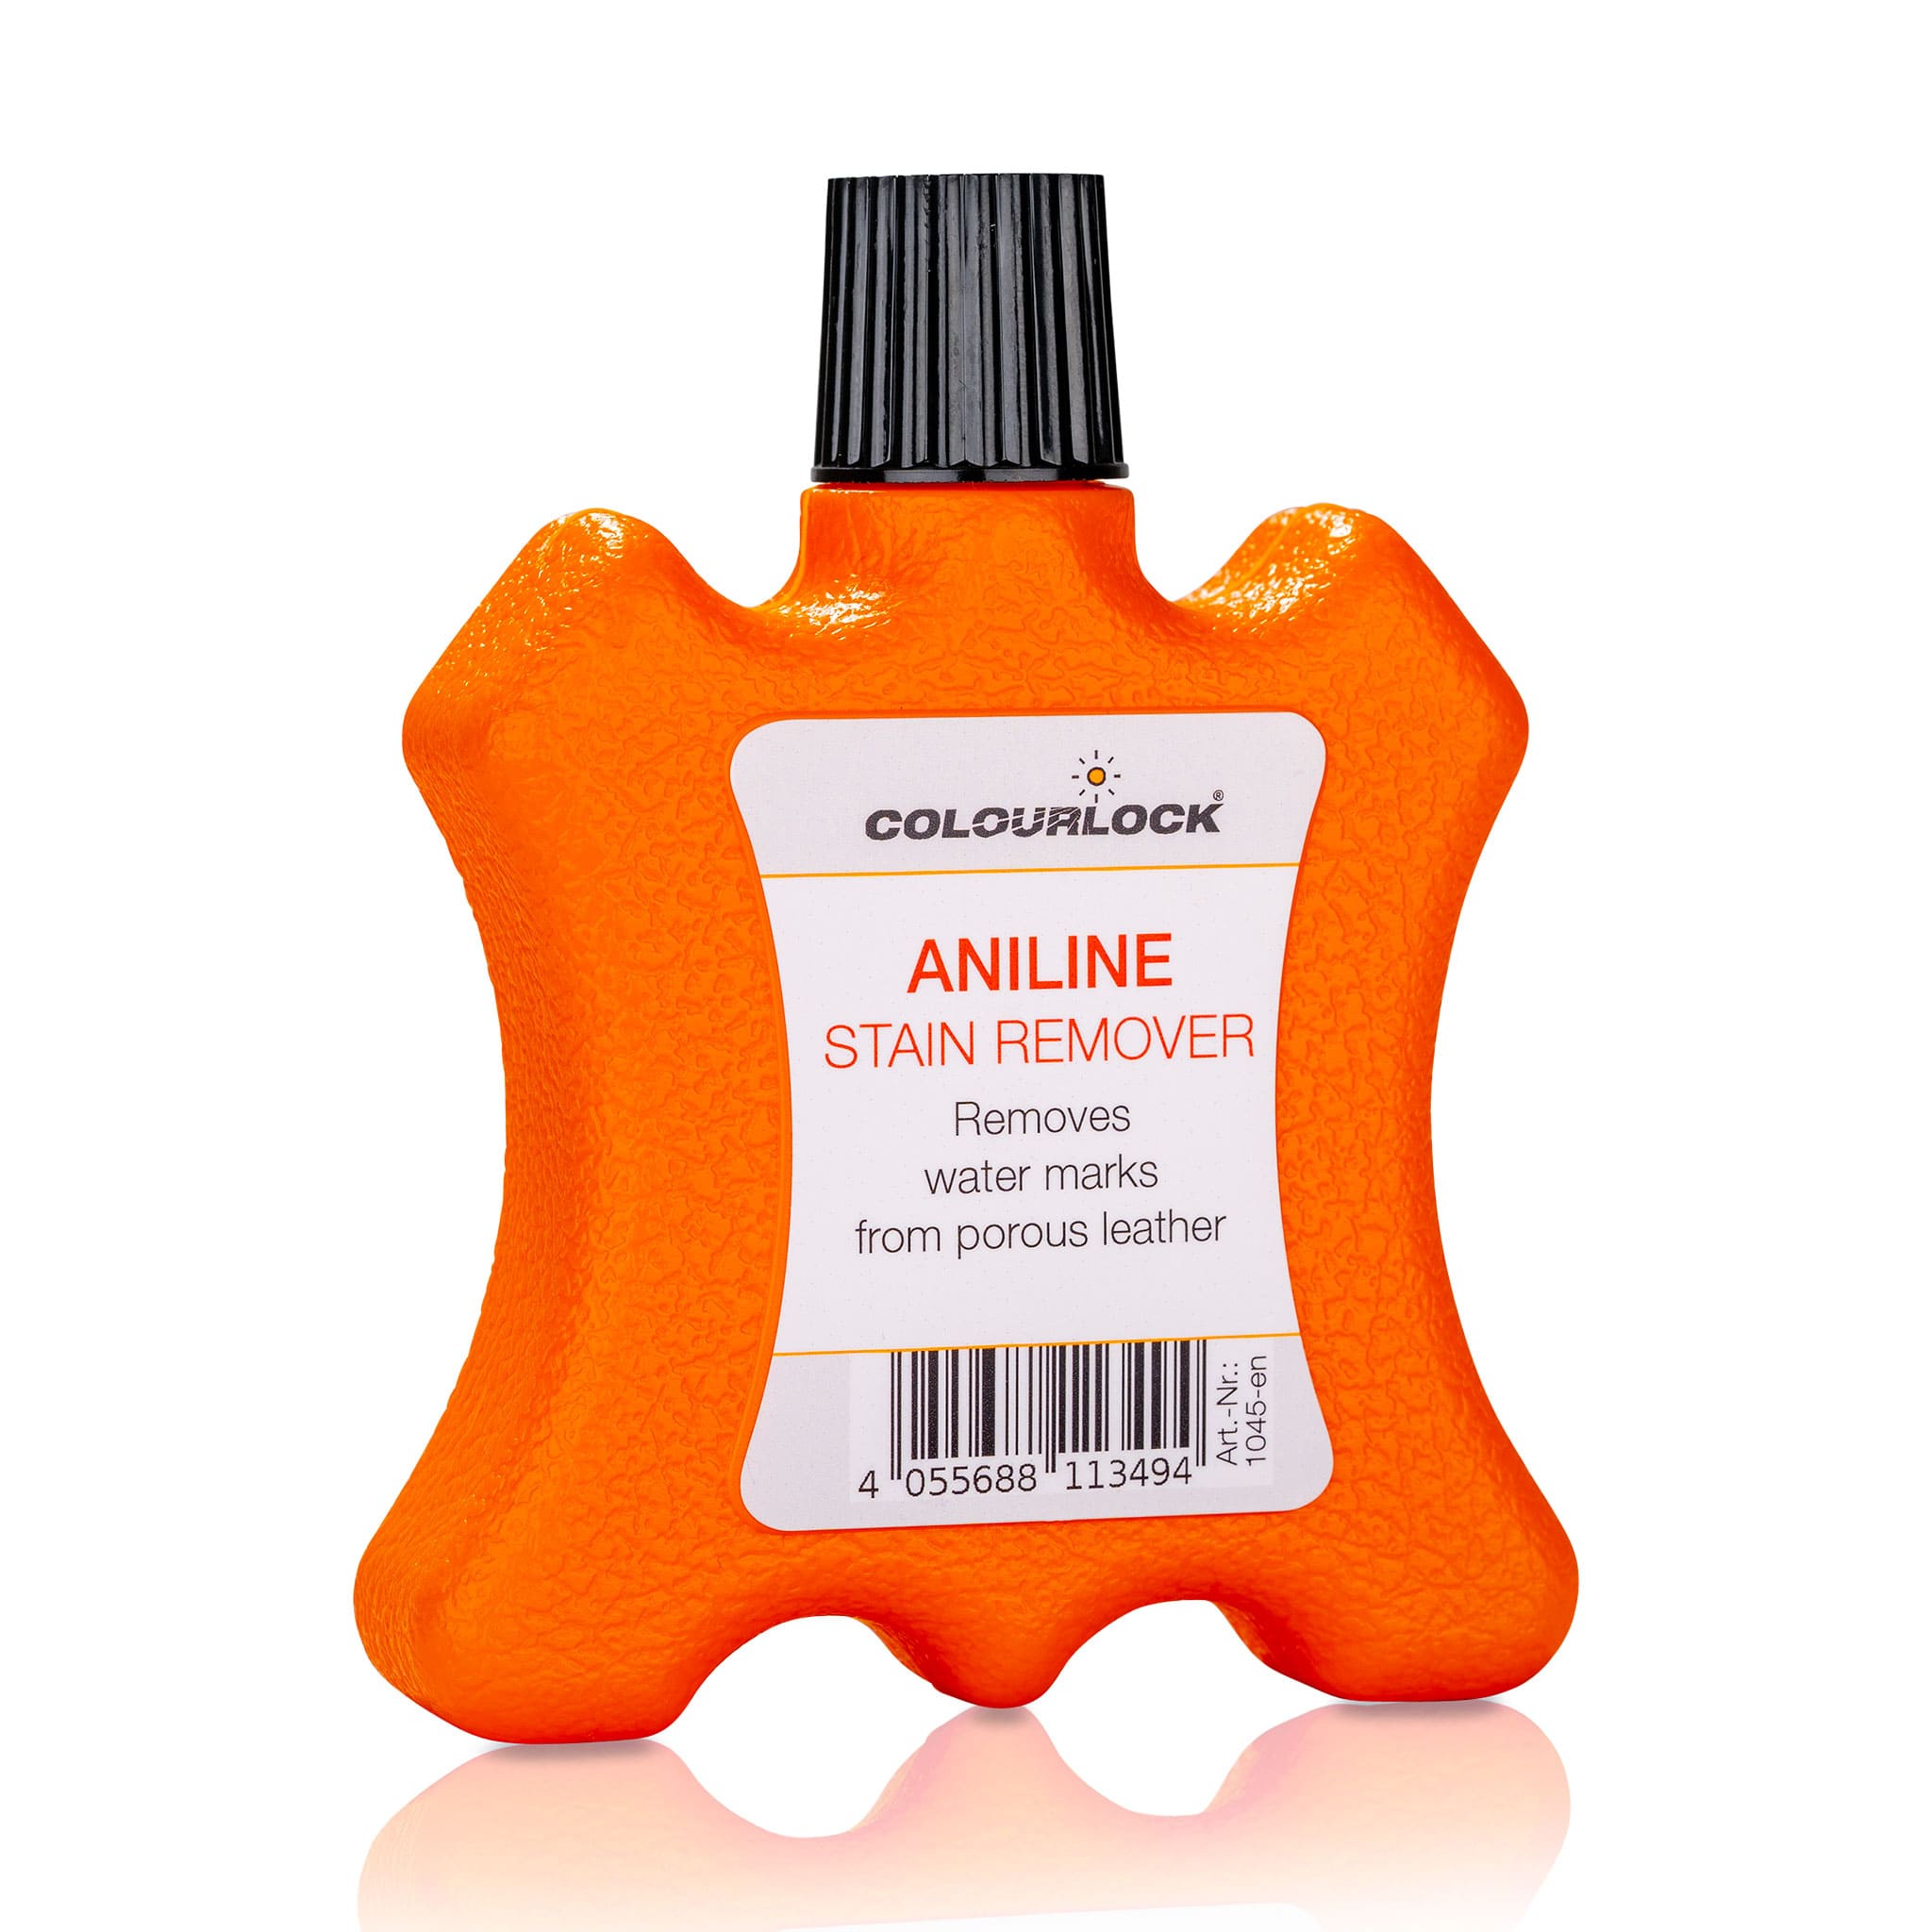 Aniline Stain Remover